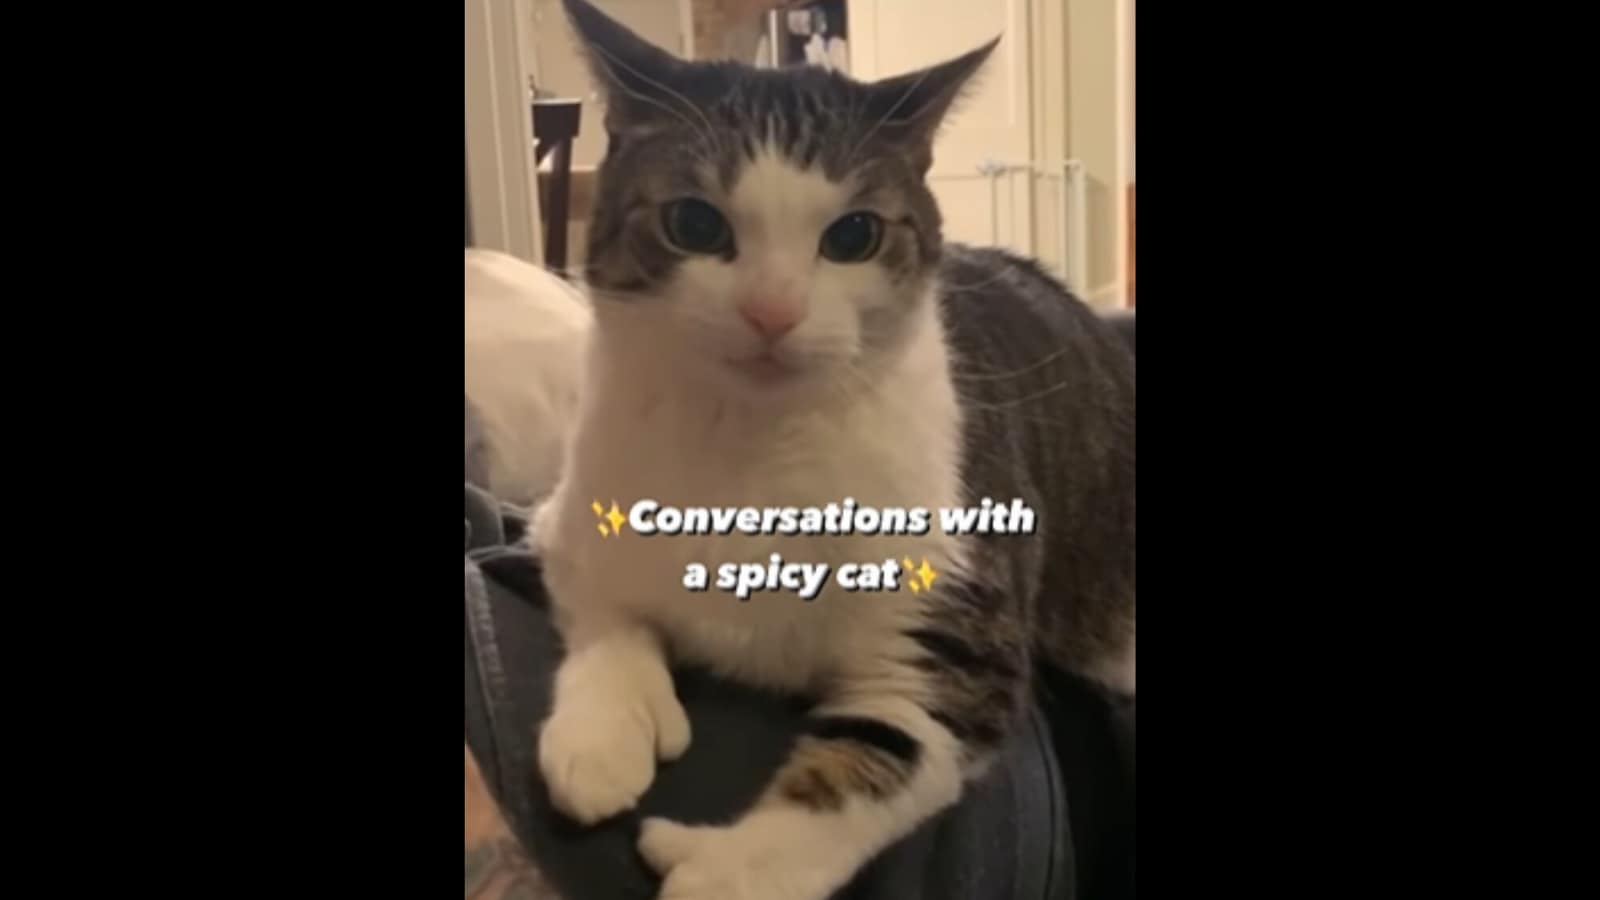 Do you know how a ‘spicy cat’ meows? Watch viral kitty video to find out